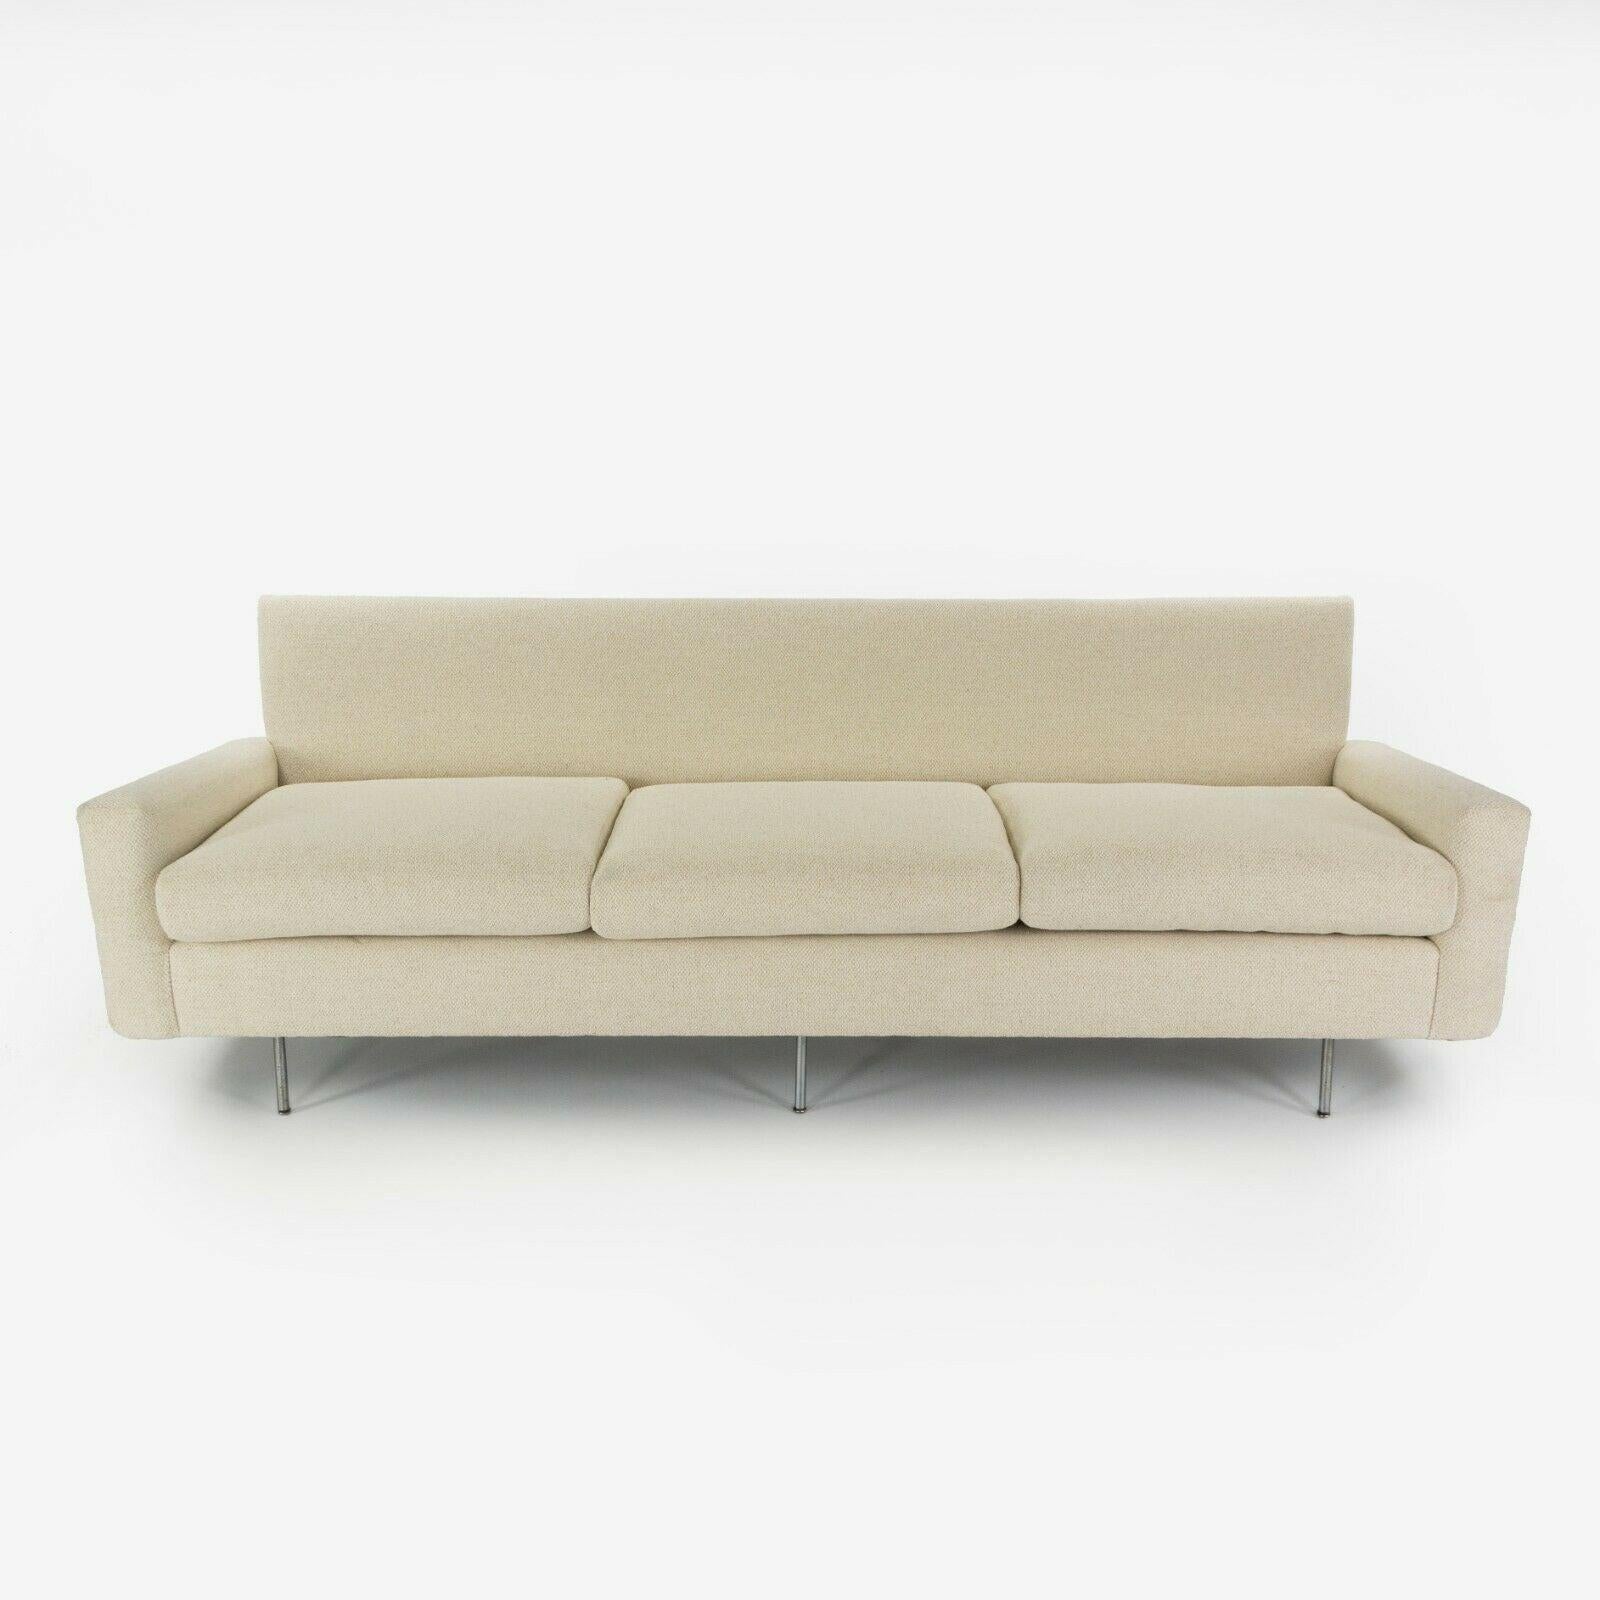 1949 Florence Knoll Associates 26 BC Upholstered 3-Seater Sofa New Upholstery In Good Condition For Sale In Philadelphia, PA